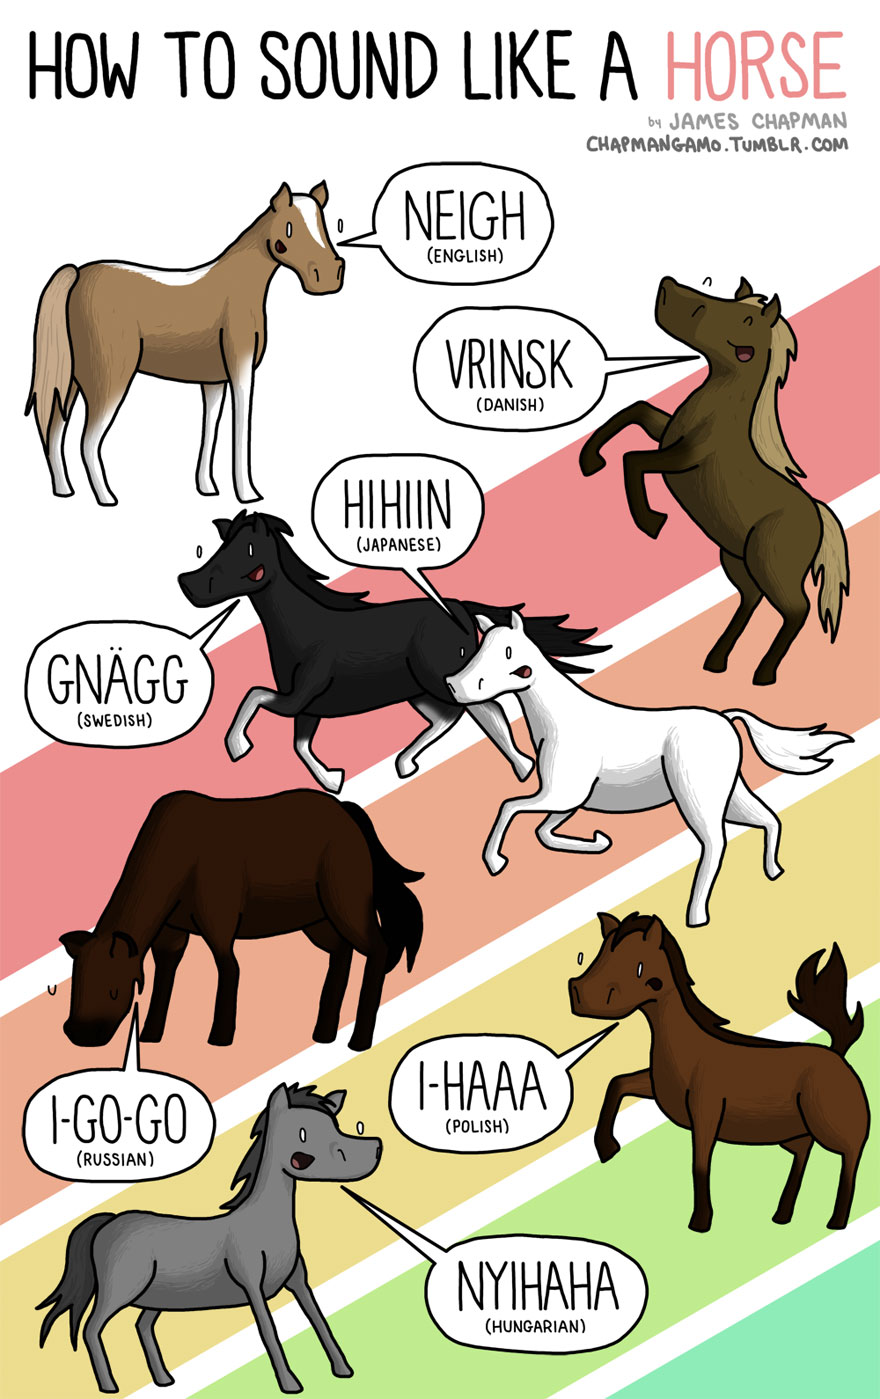 How Do Animals Sound In Different Languages?